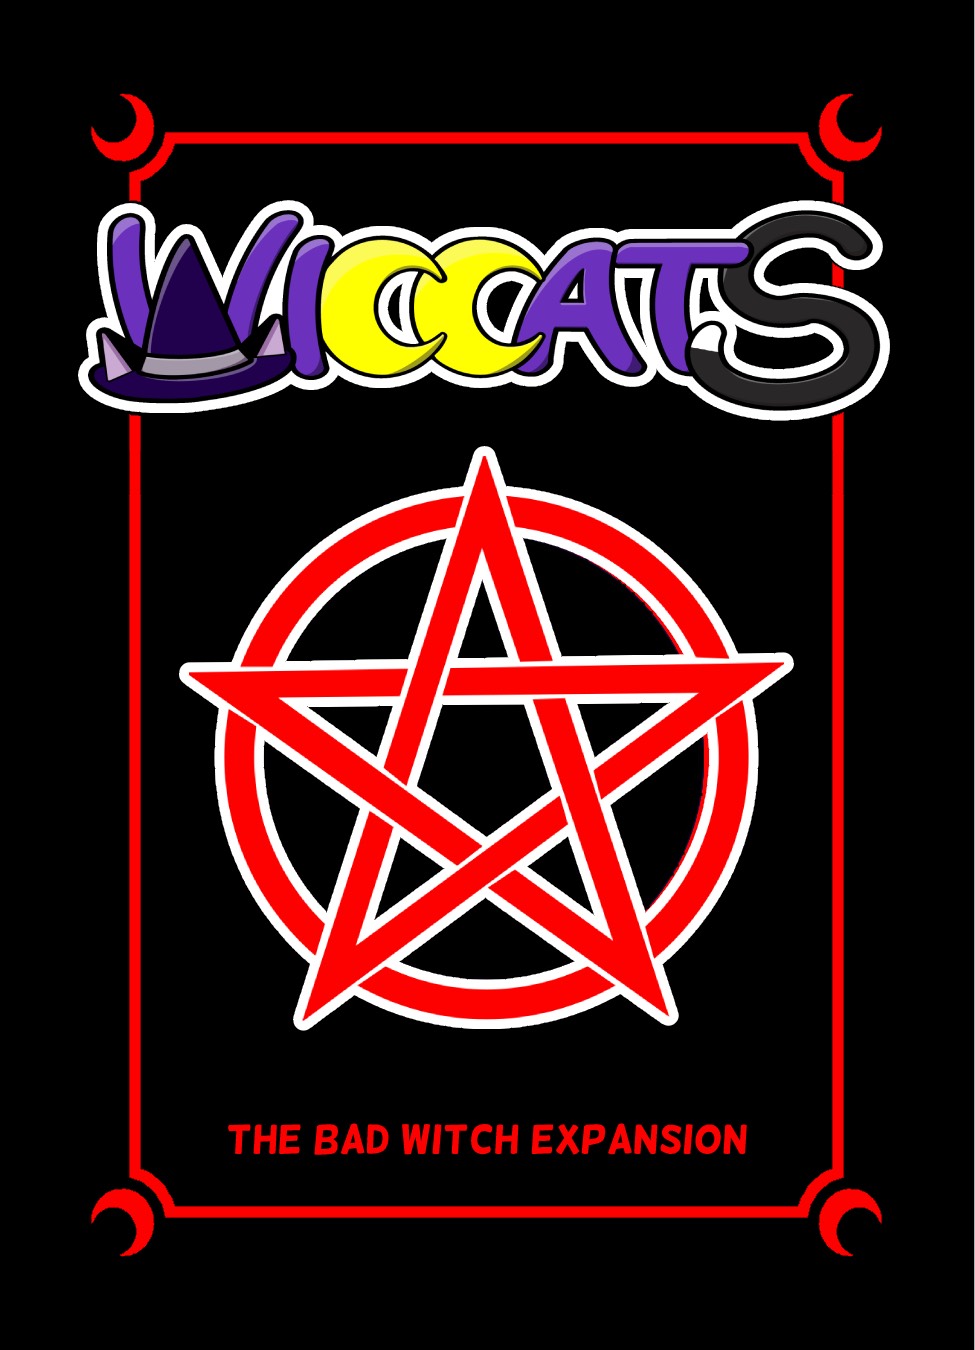 Wiccats Bad Witch